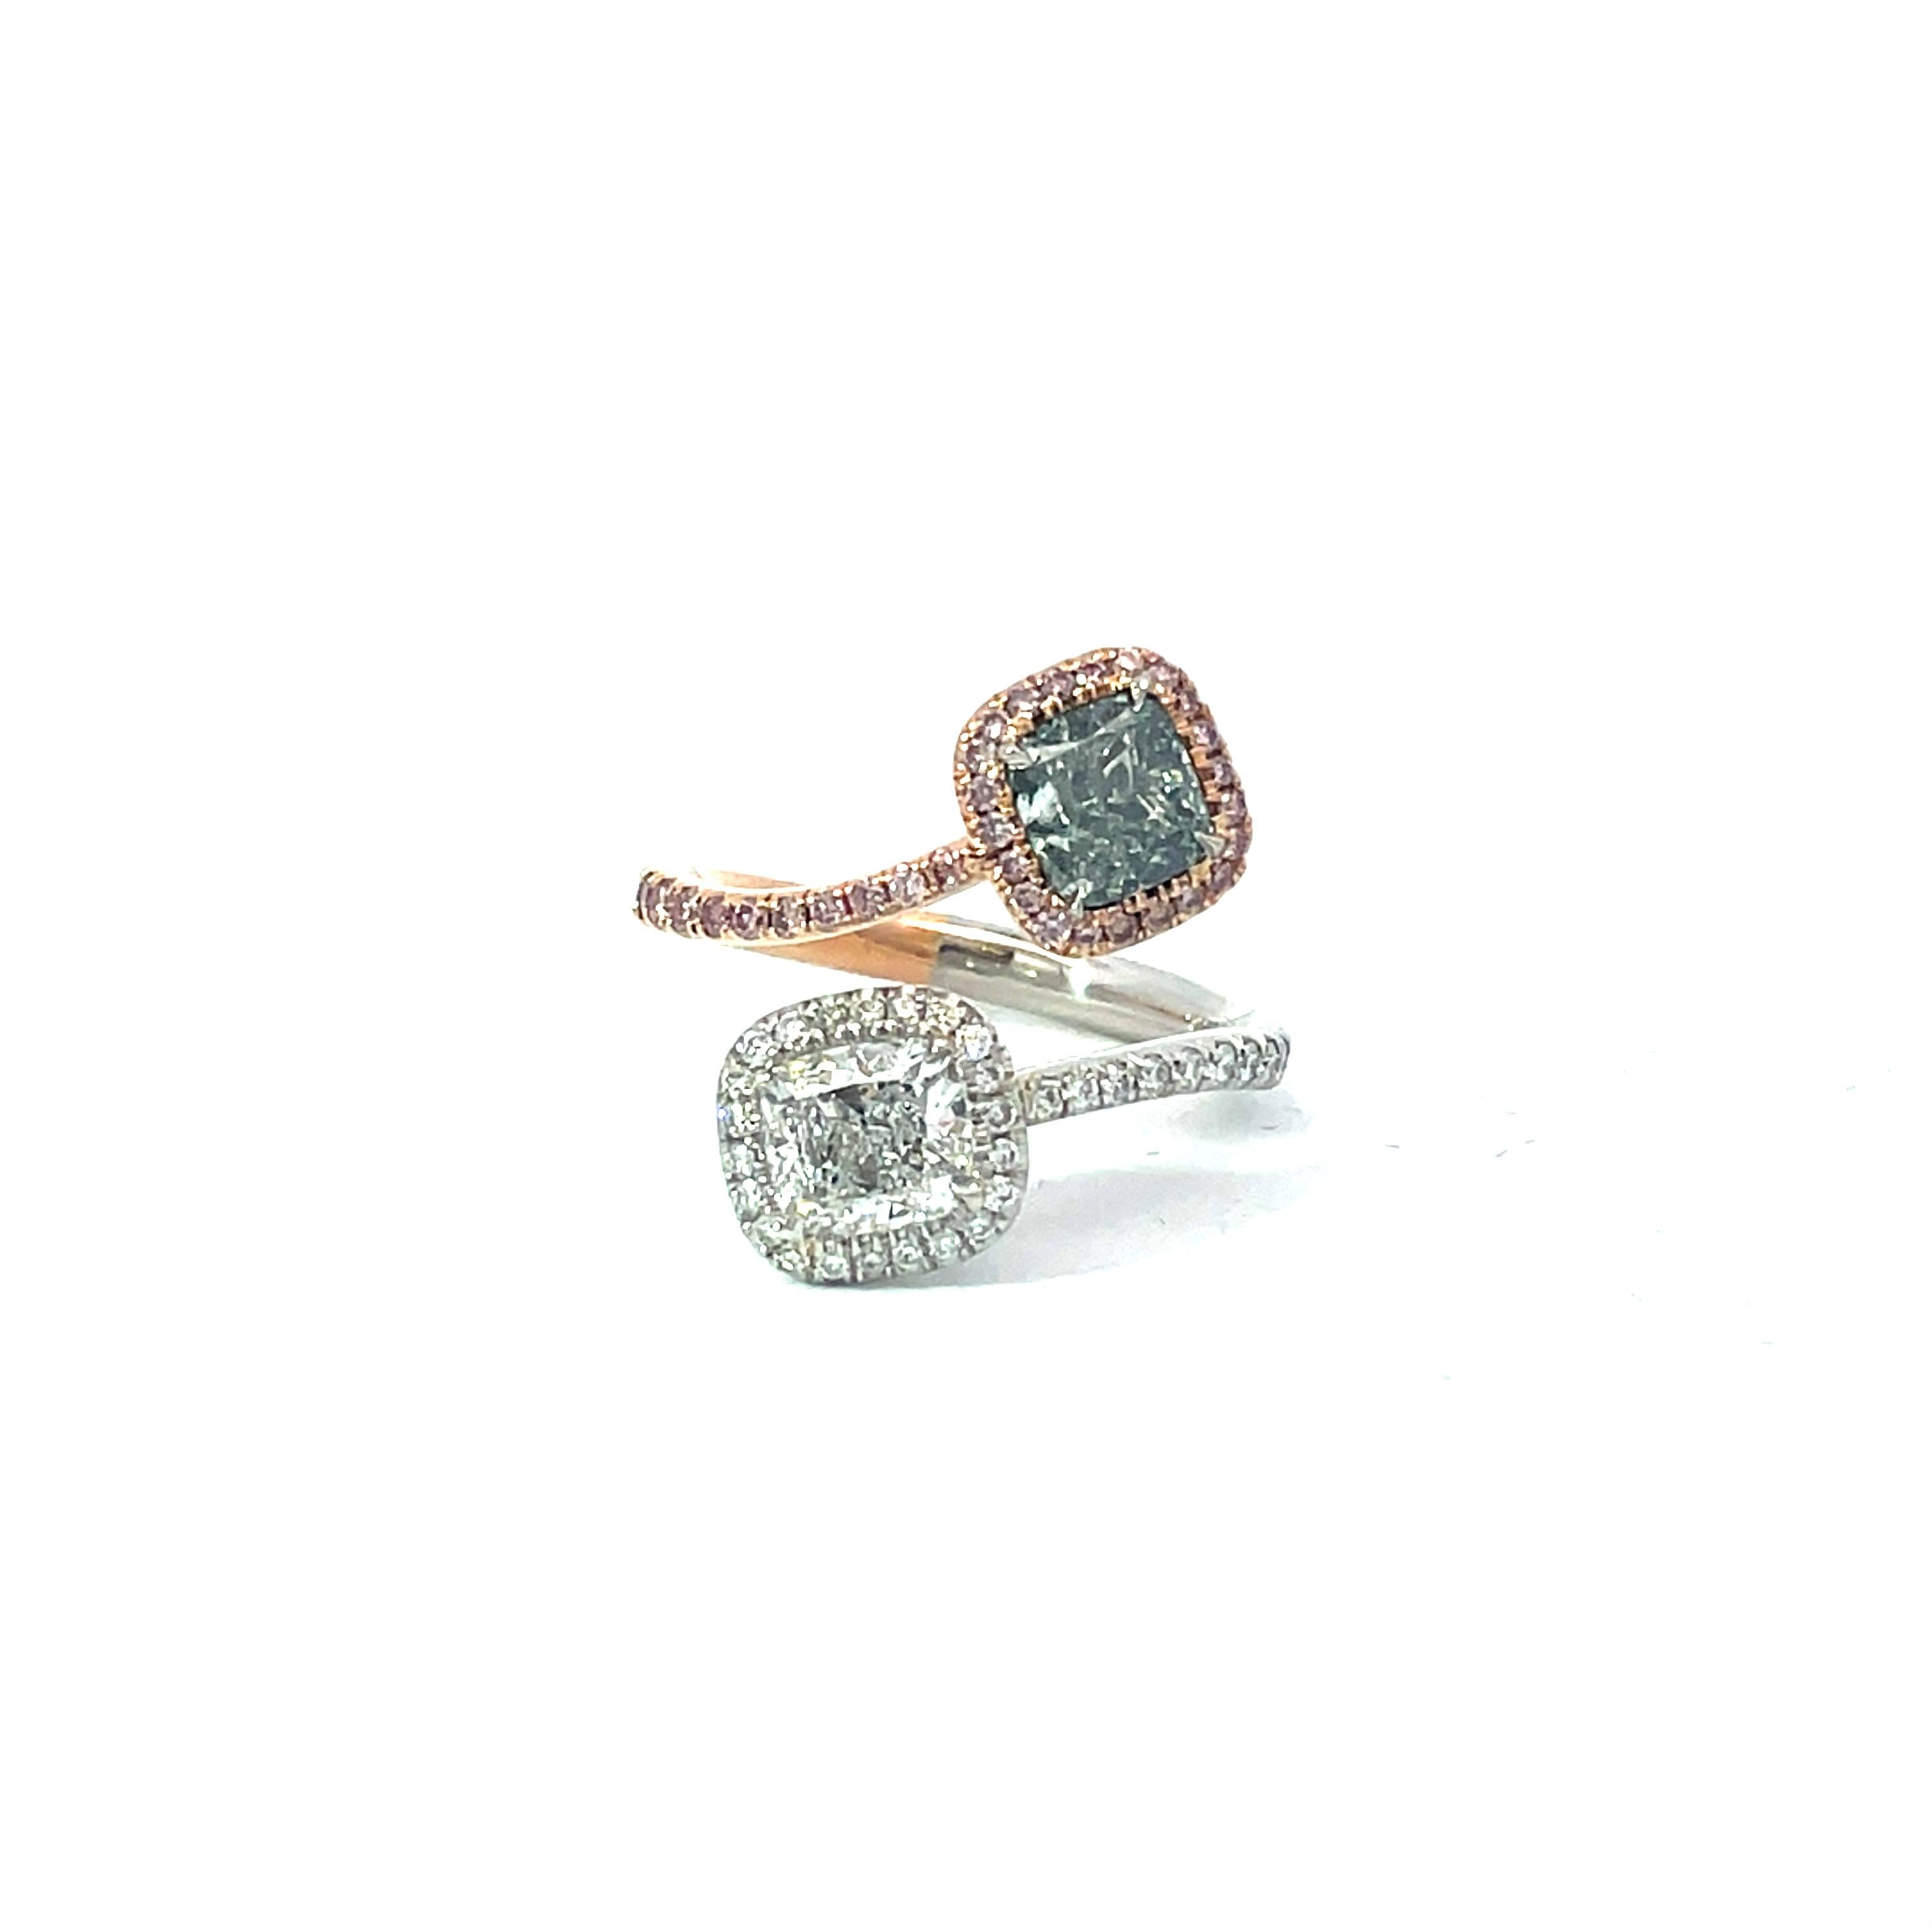 For Sale:  The luxurious 1ct Fancy Light Green Diamond and 1ct White Diamond Cushion Ring 6